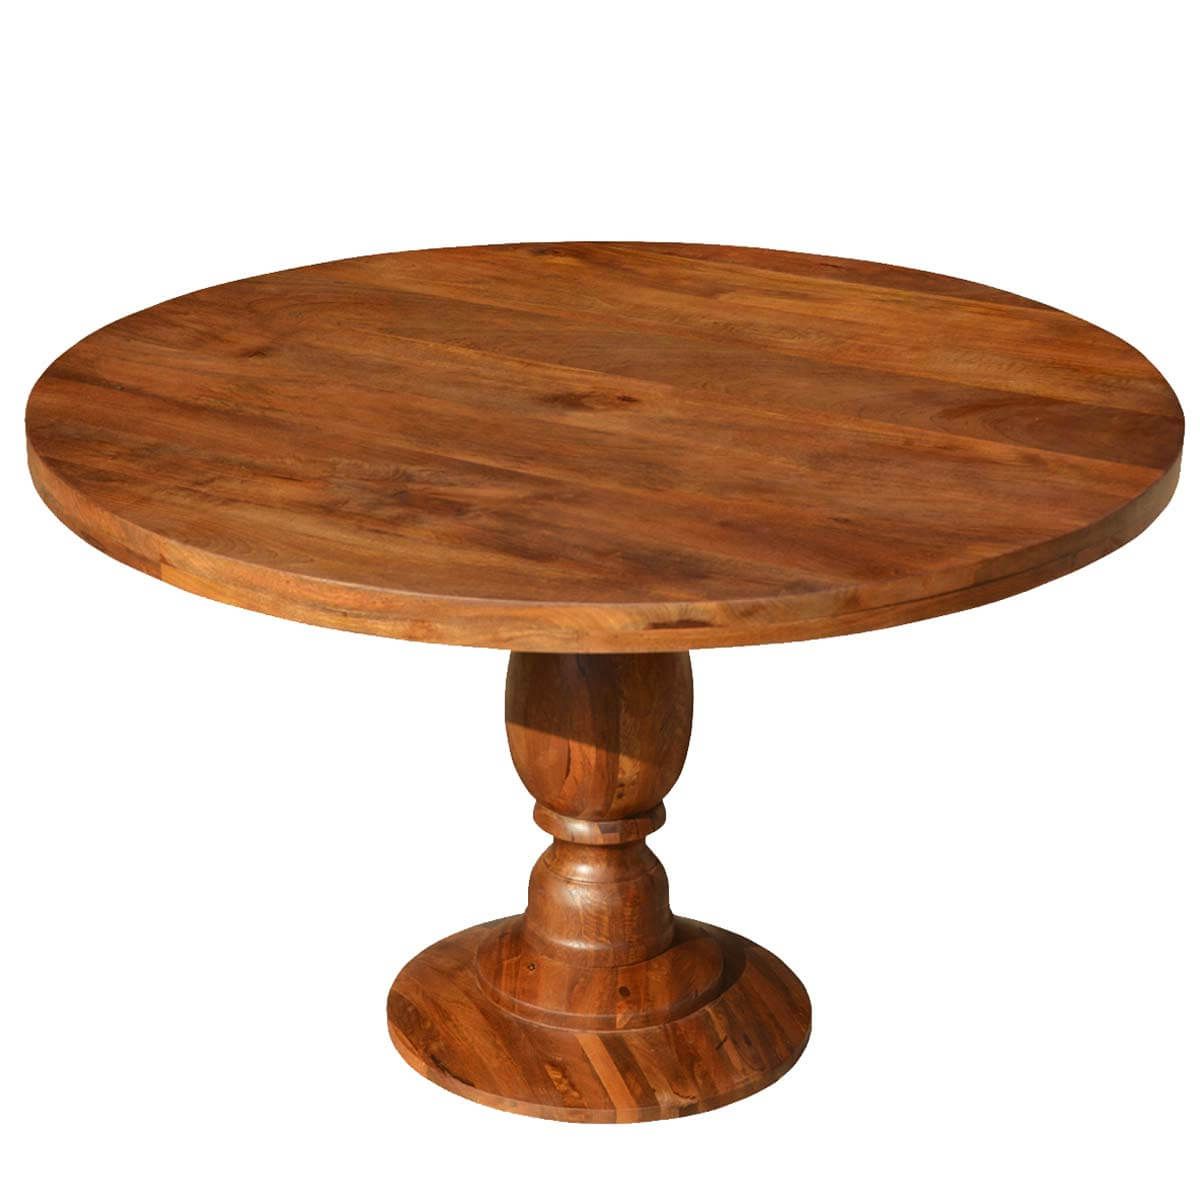 Rustic Colonial American Solid Wood 48" Round Pedestal With Regard To Newest Corvena 48'' Pedestal Dining Tables (View 1 of 20)